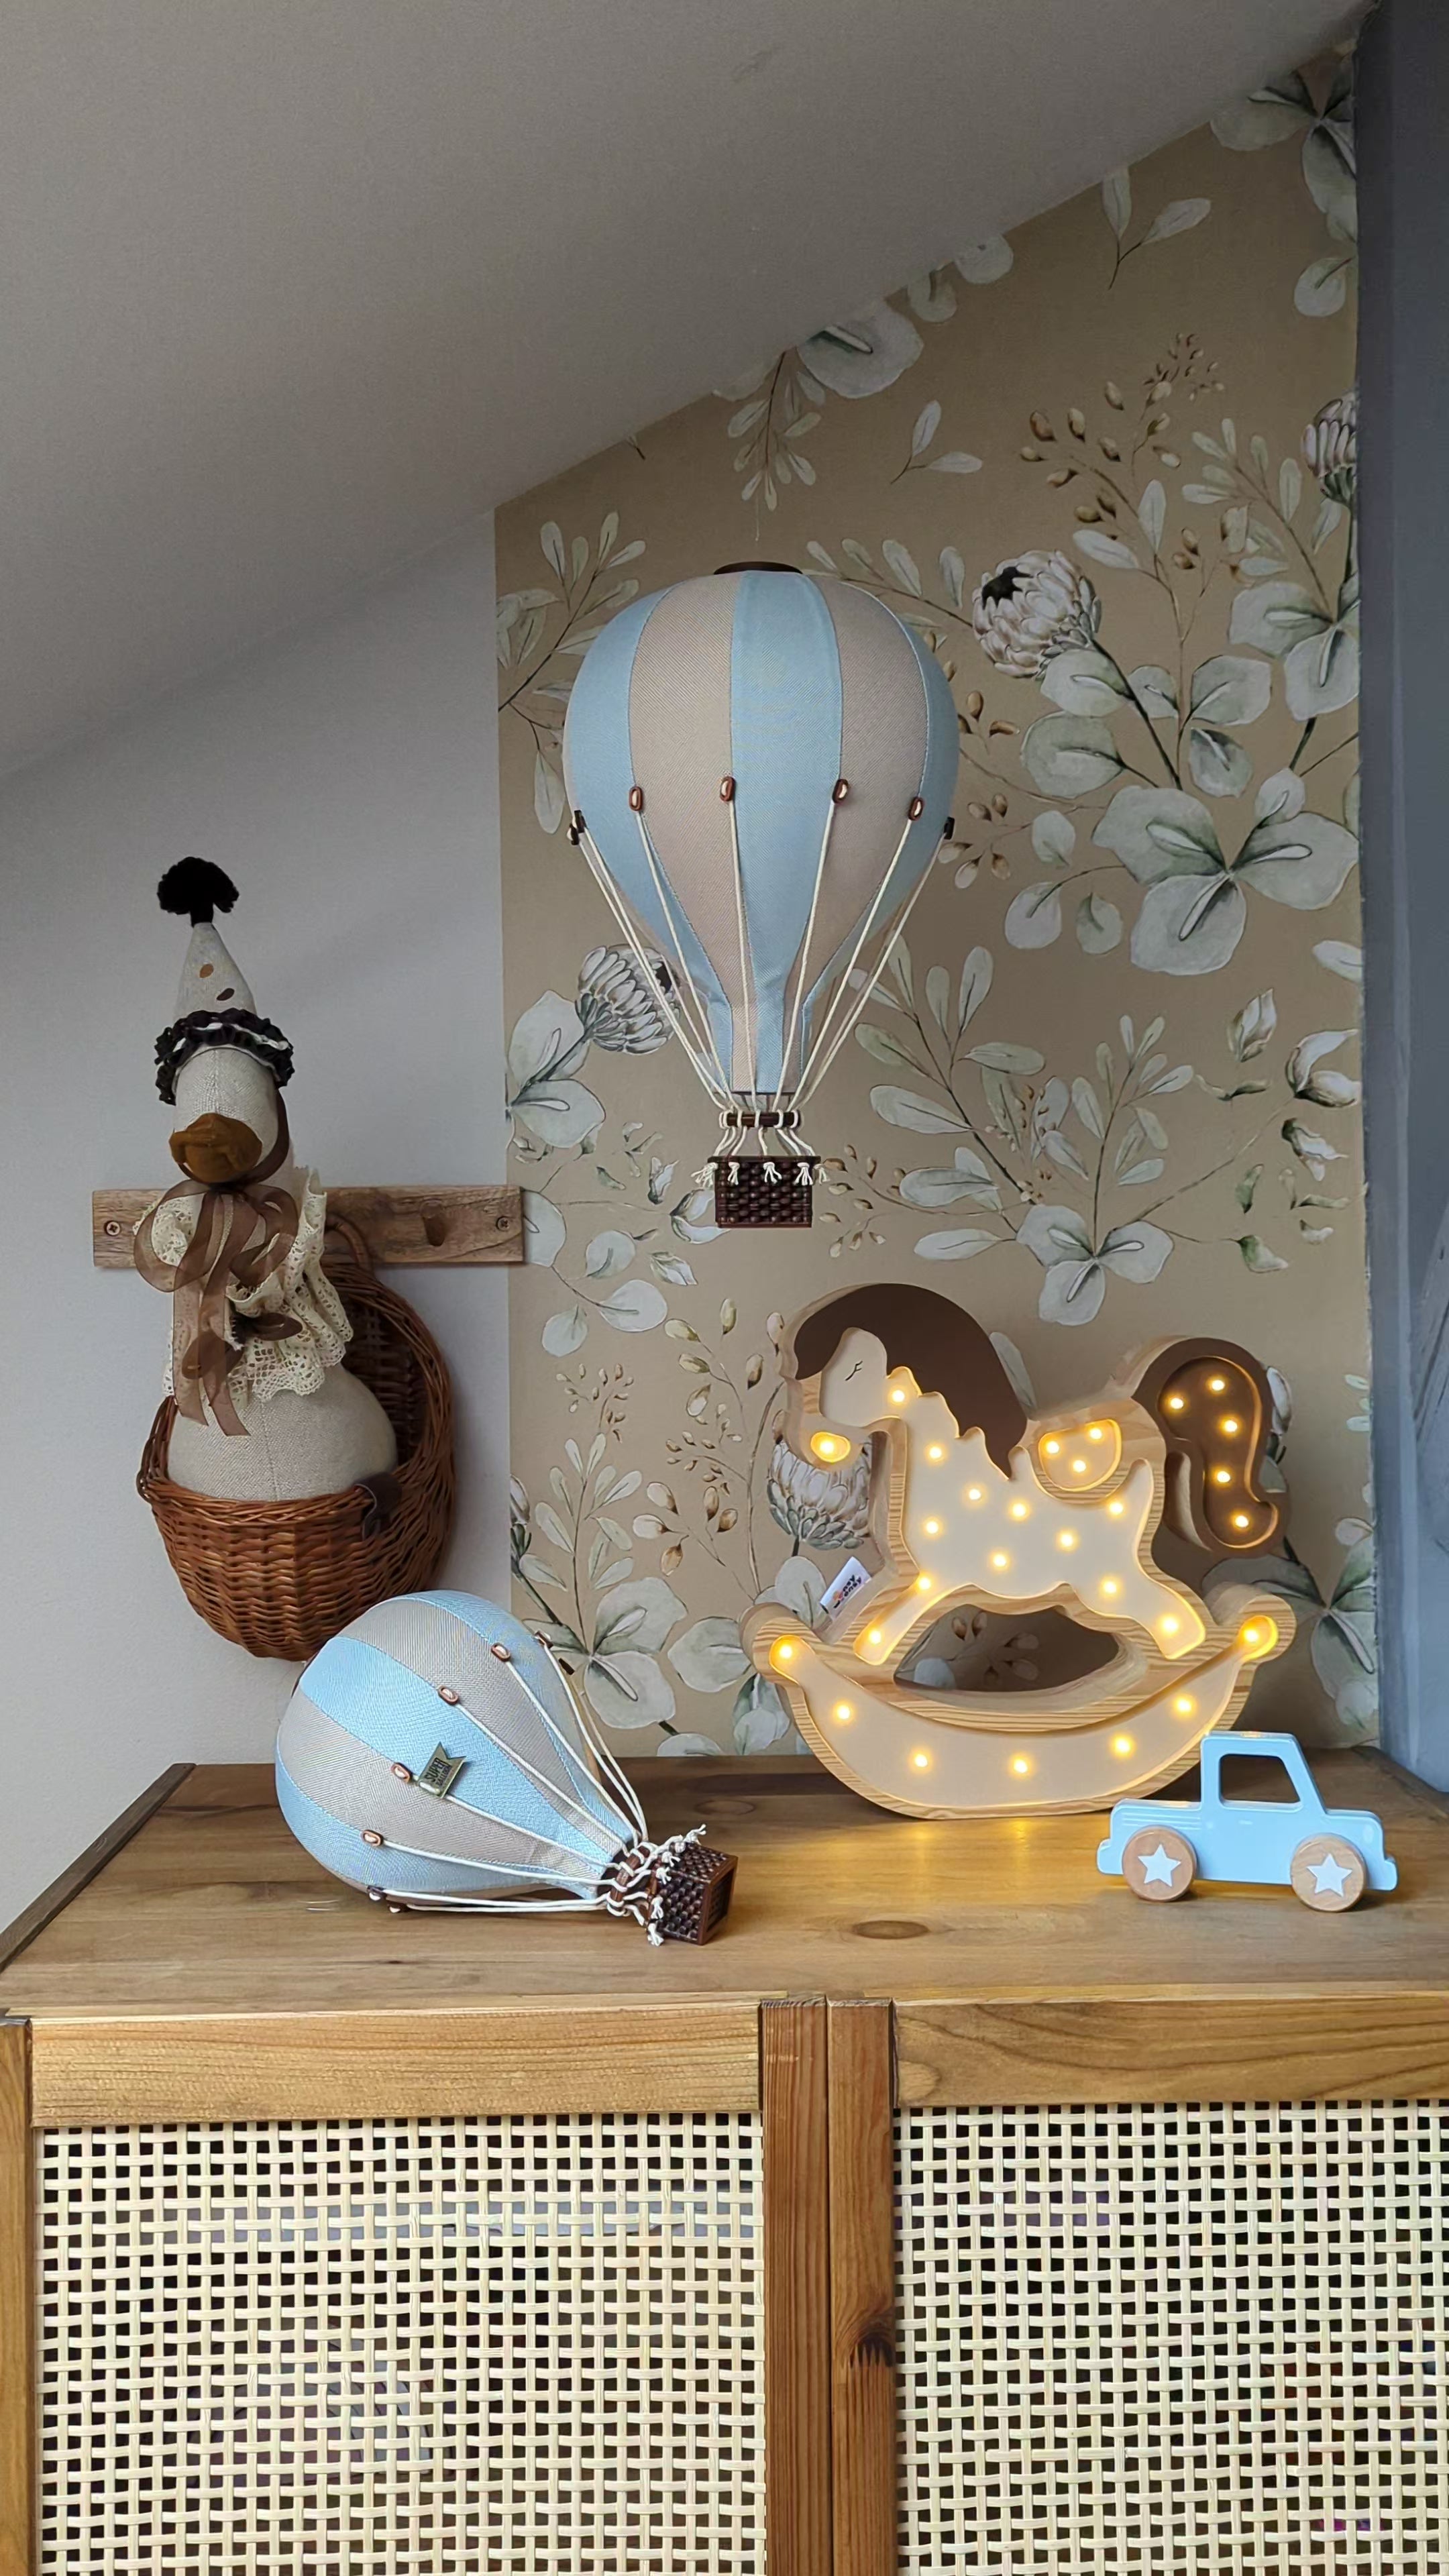 Beige and Blue Decorative Hot Air Balloon (3 Sizes Available)